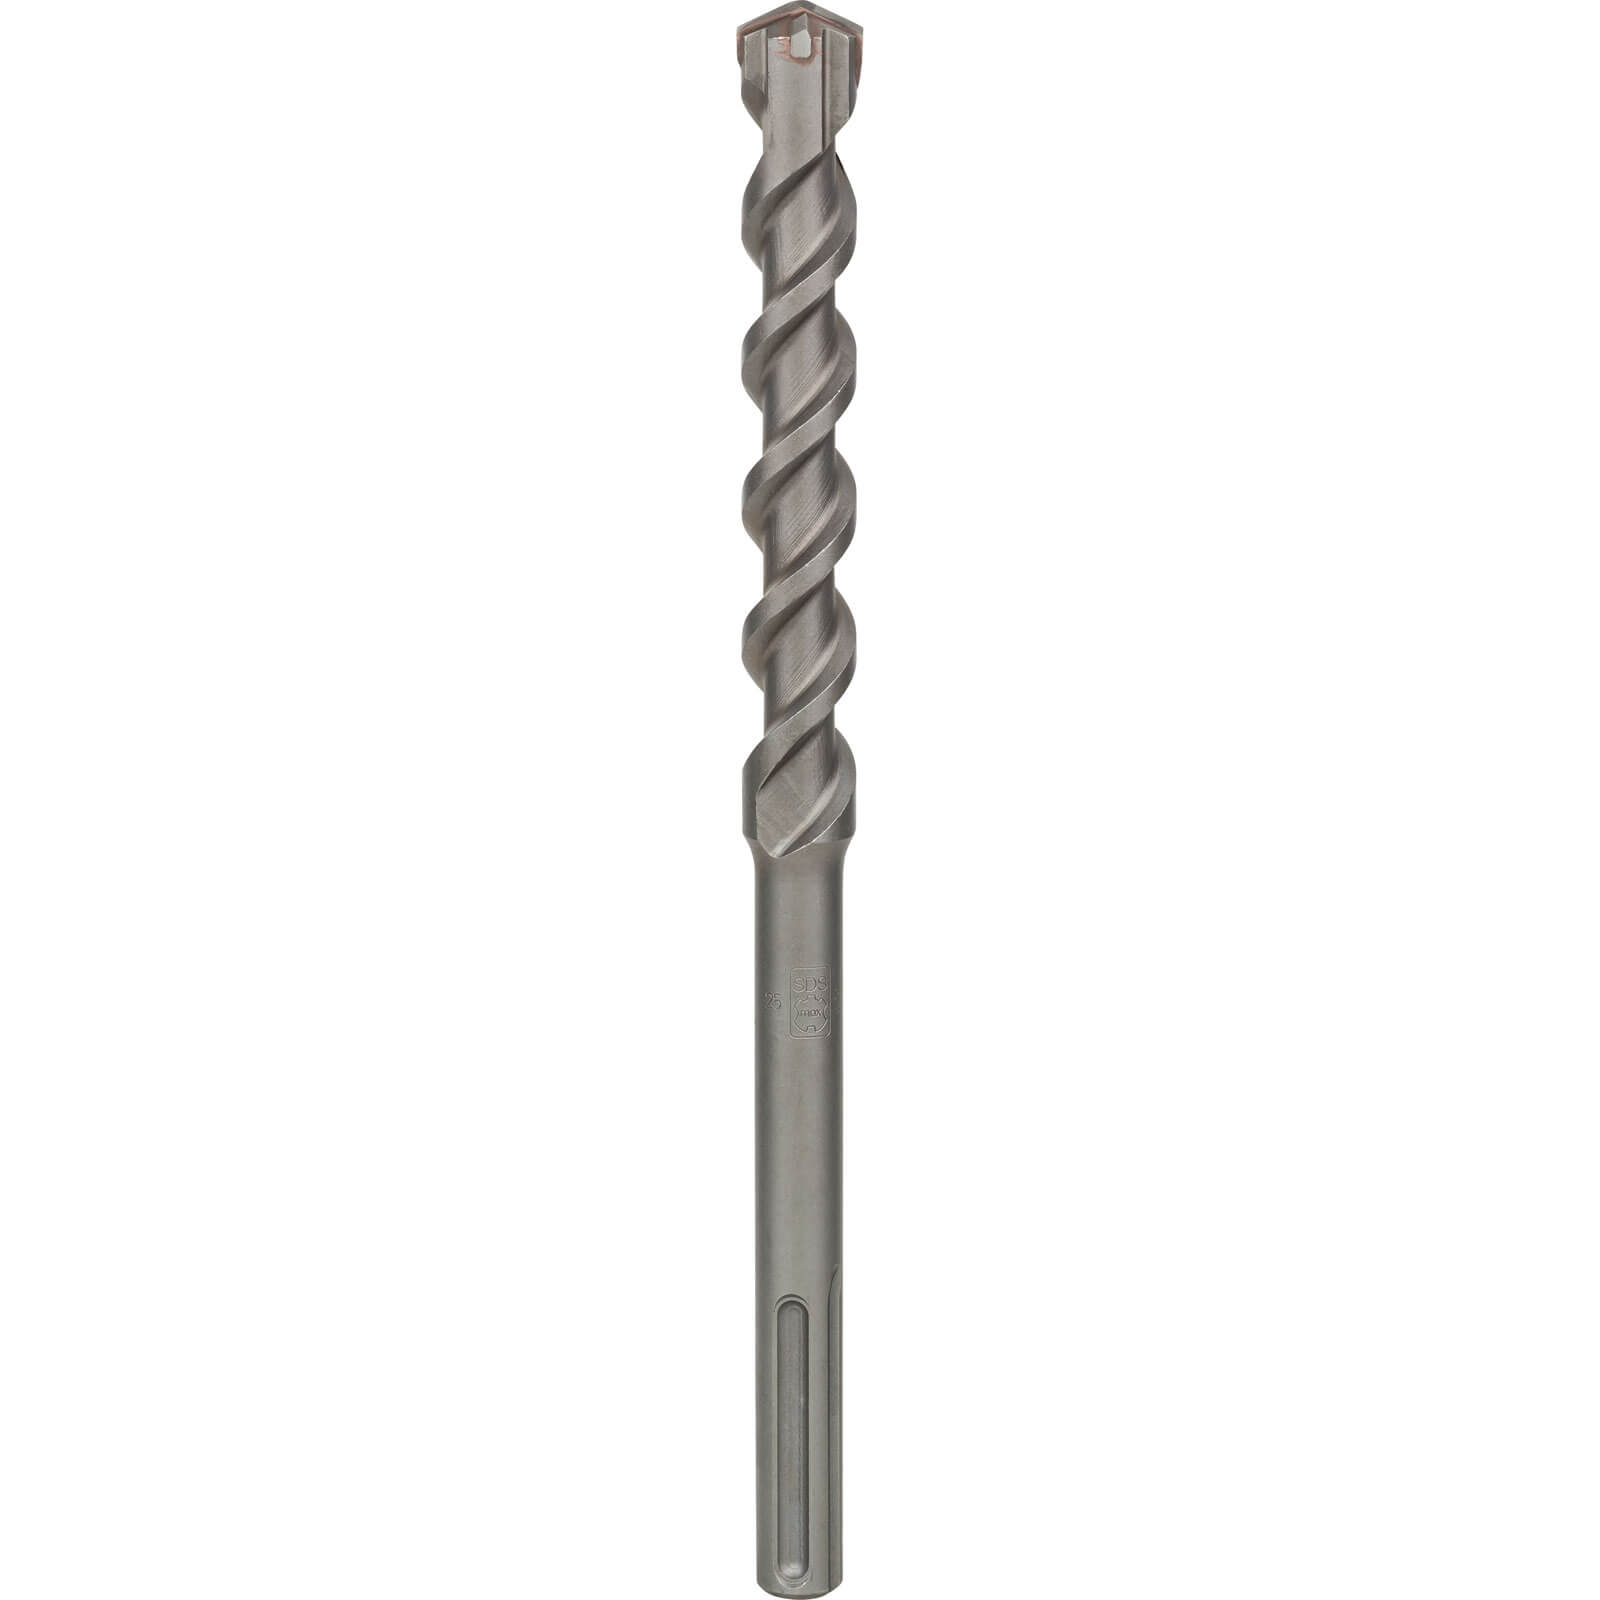 Image of Bosch M4 SDS Max Masonry Drill Bit 25mm 320mm Pack of 1